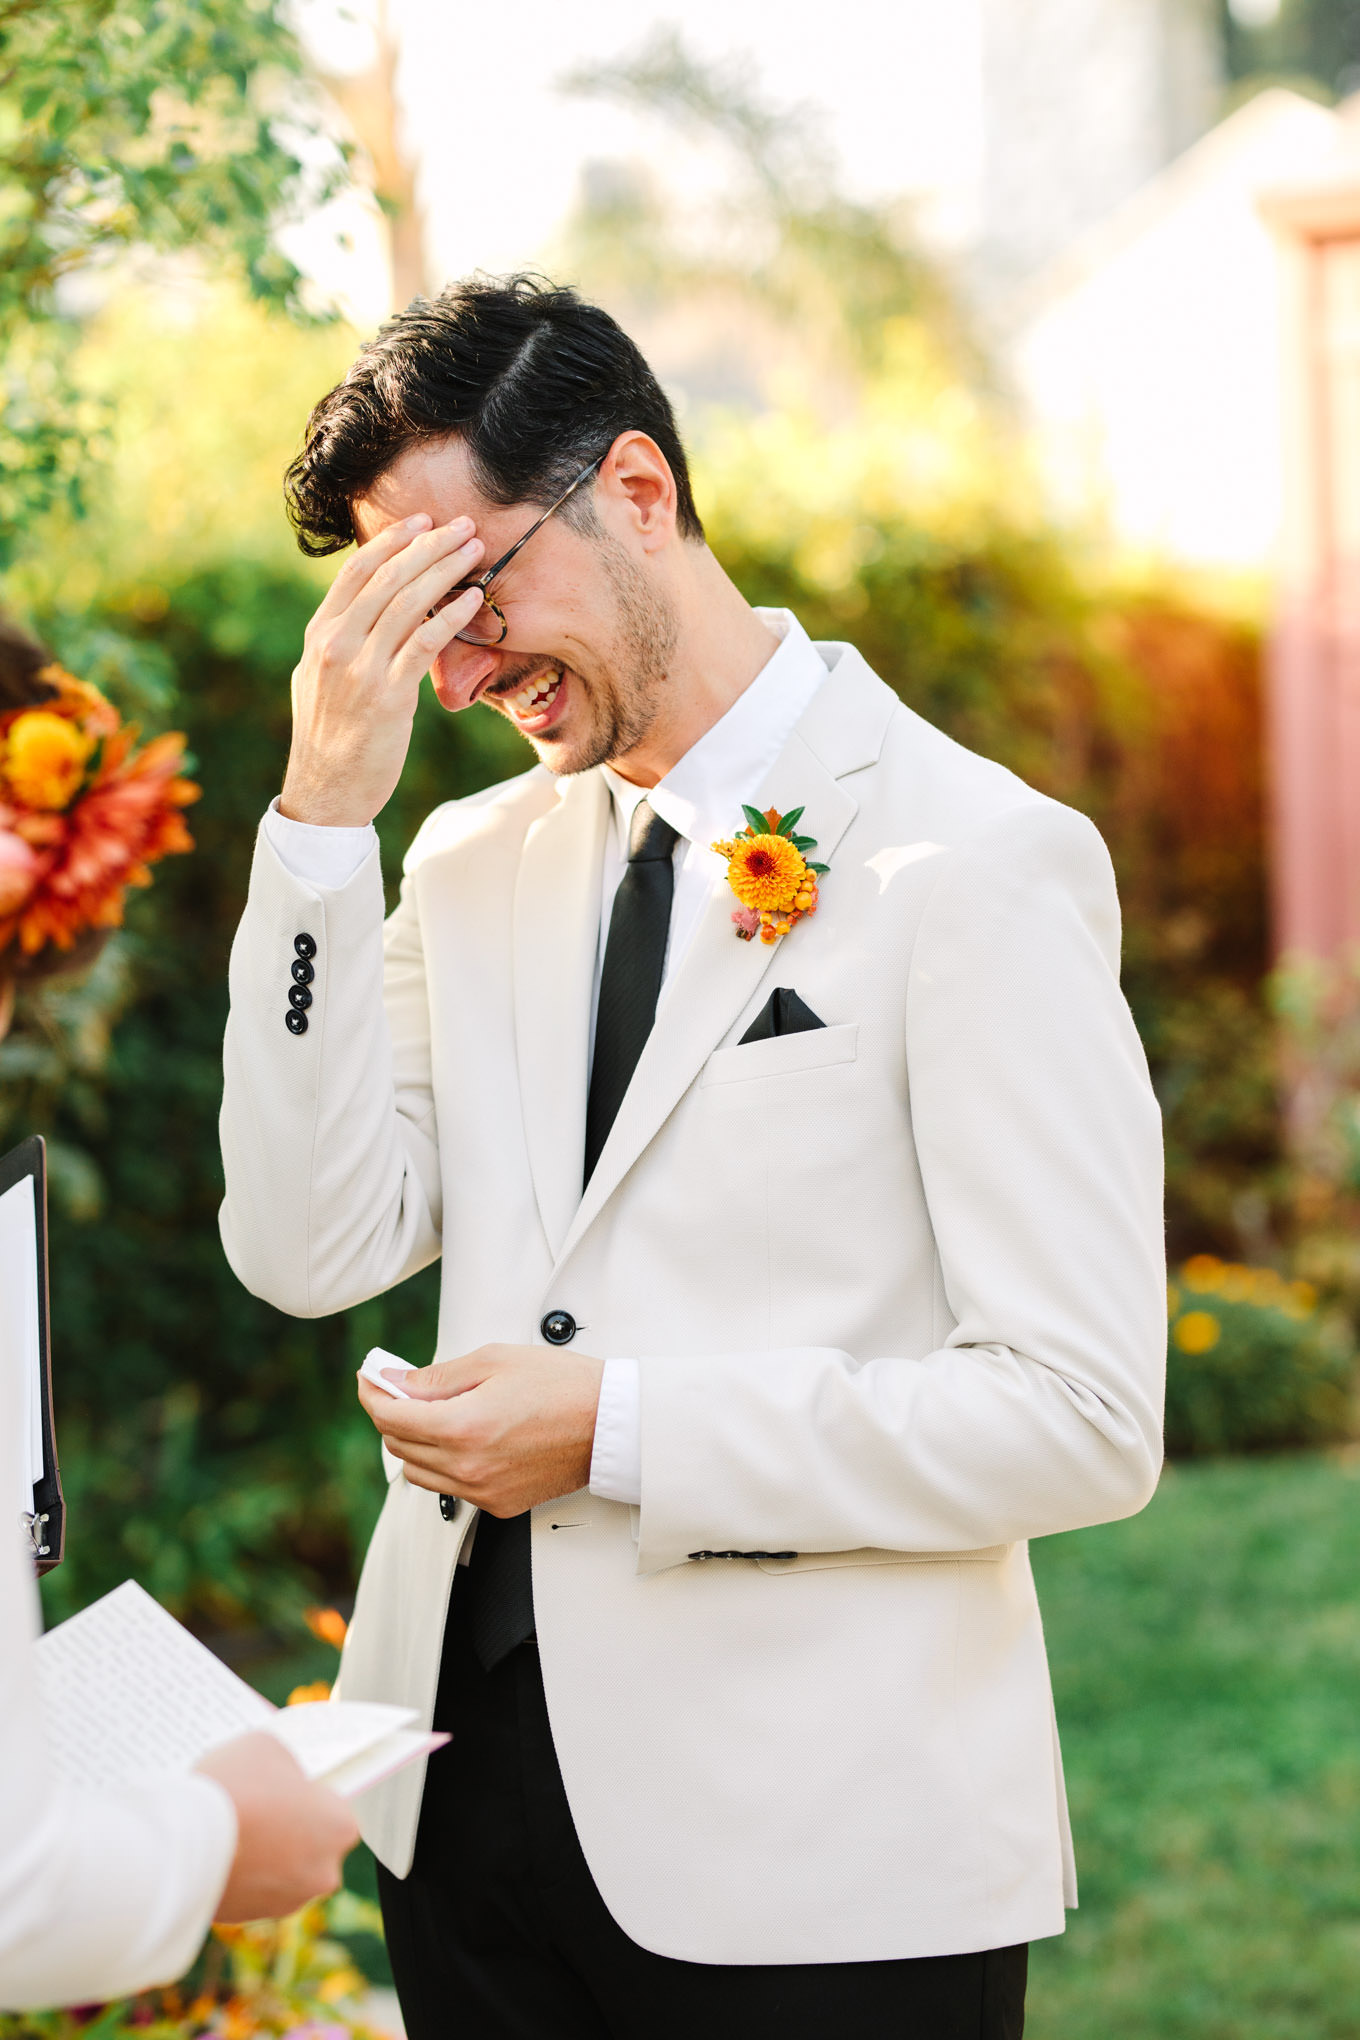 Grooms reaction while reading personal vows | Vibrant backyard micro wedding featured on Green Wedding Shoes | Colorful LA wedding photography | #losangeleswedding #backyardwedding #microwedding #laweddingphotographer Source: Mary Costa Photography | Los Angeles